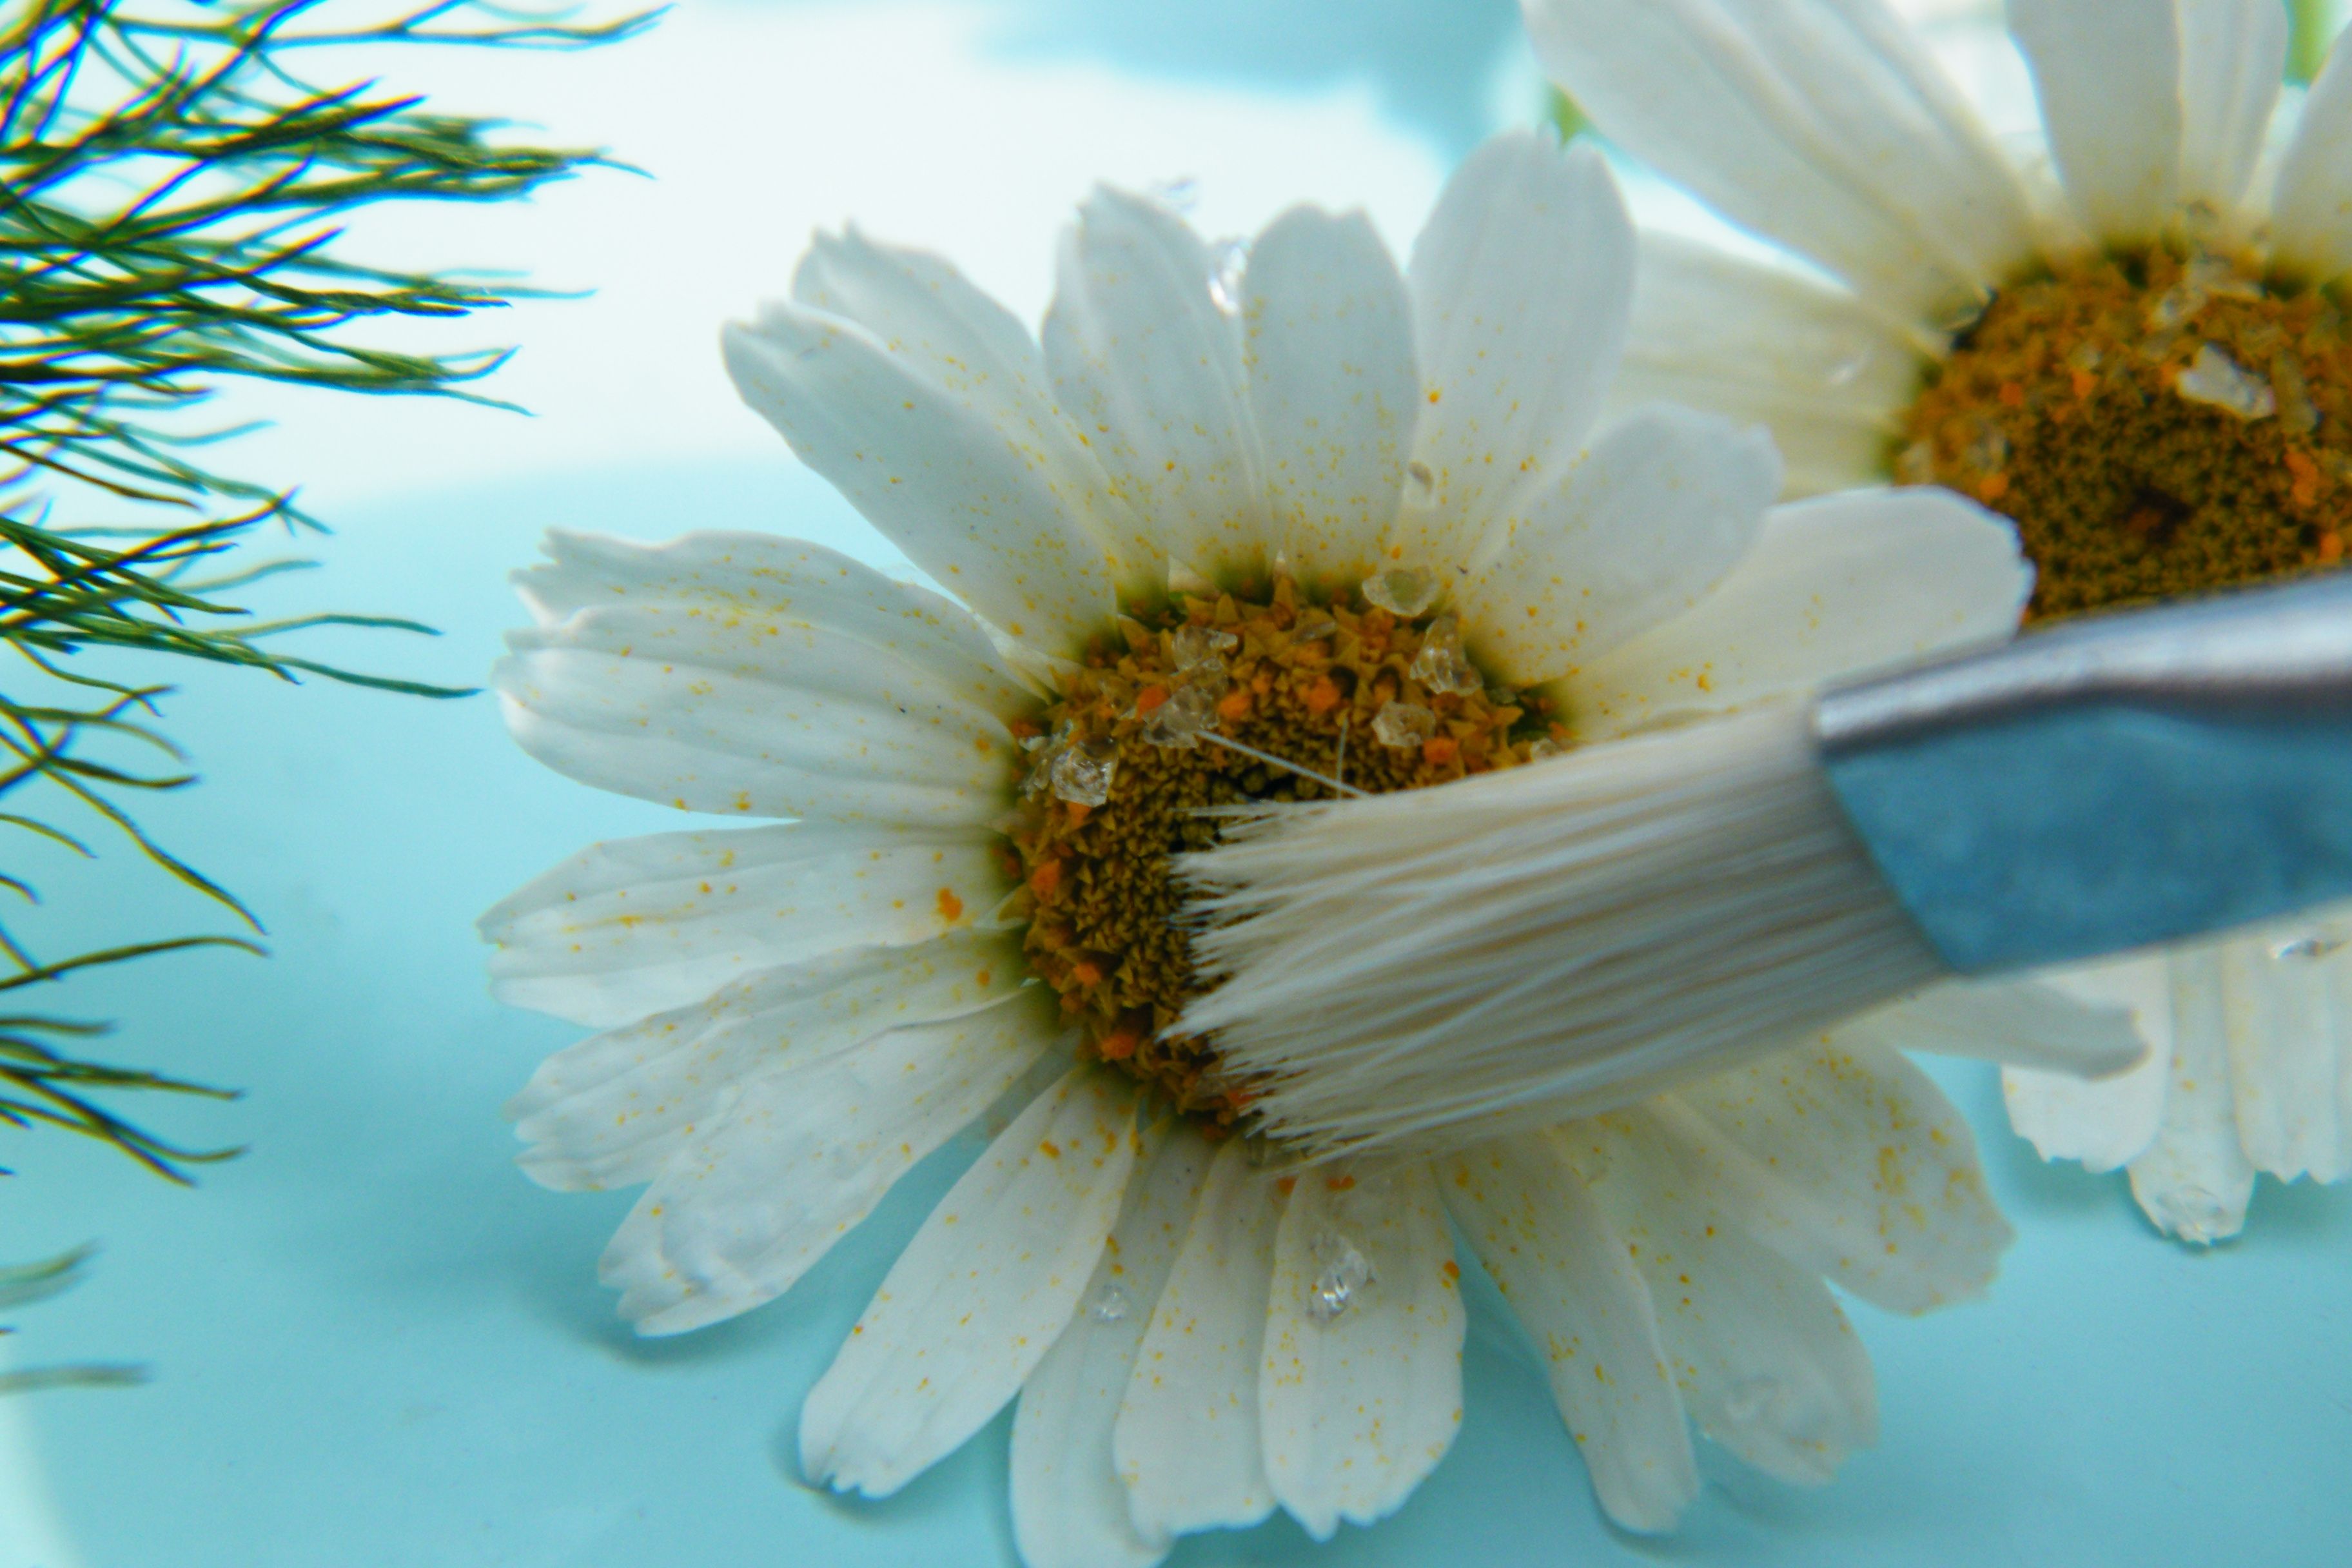 brushing silica gel off dried daisy | How To Dry Flowers | Pinterest ...